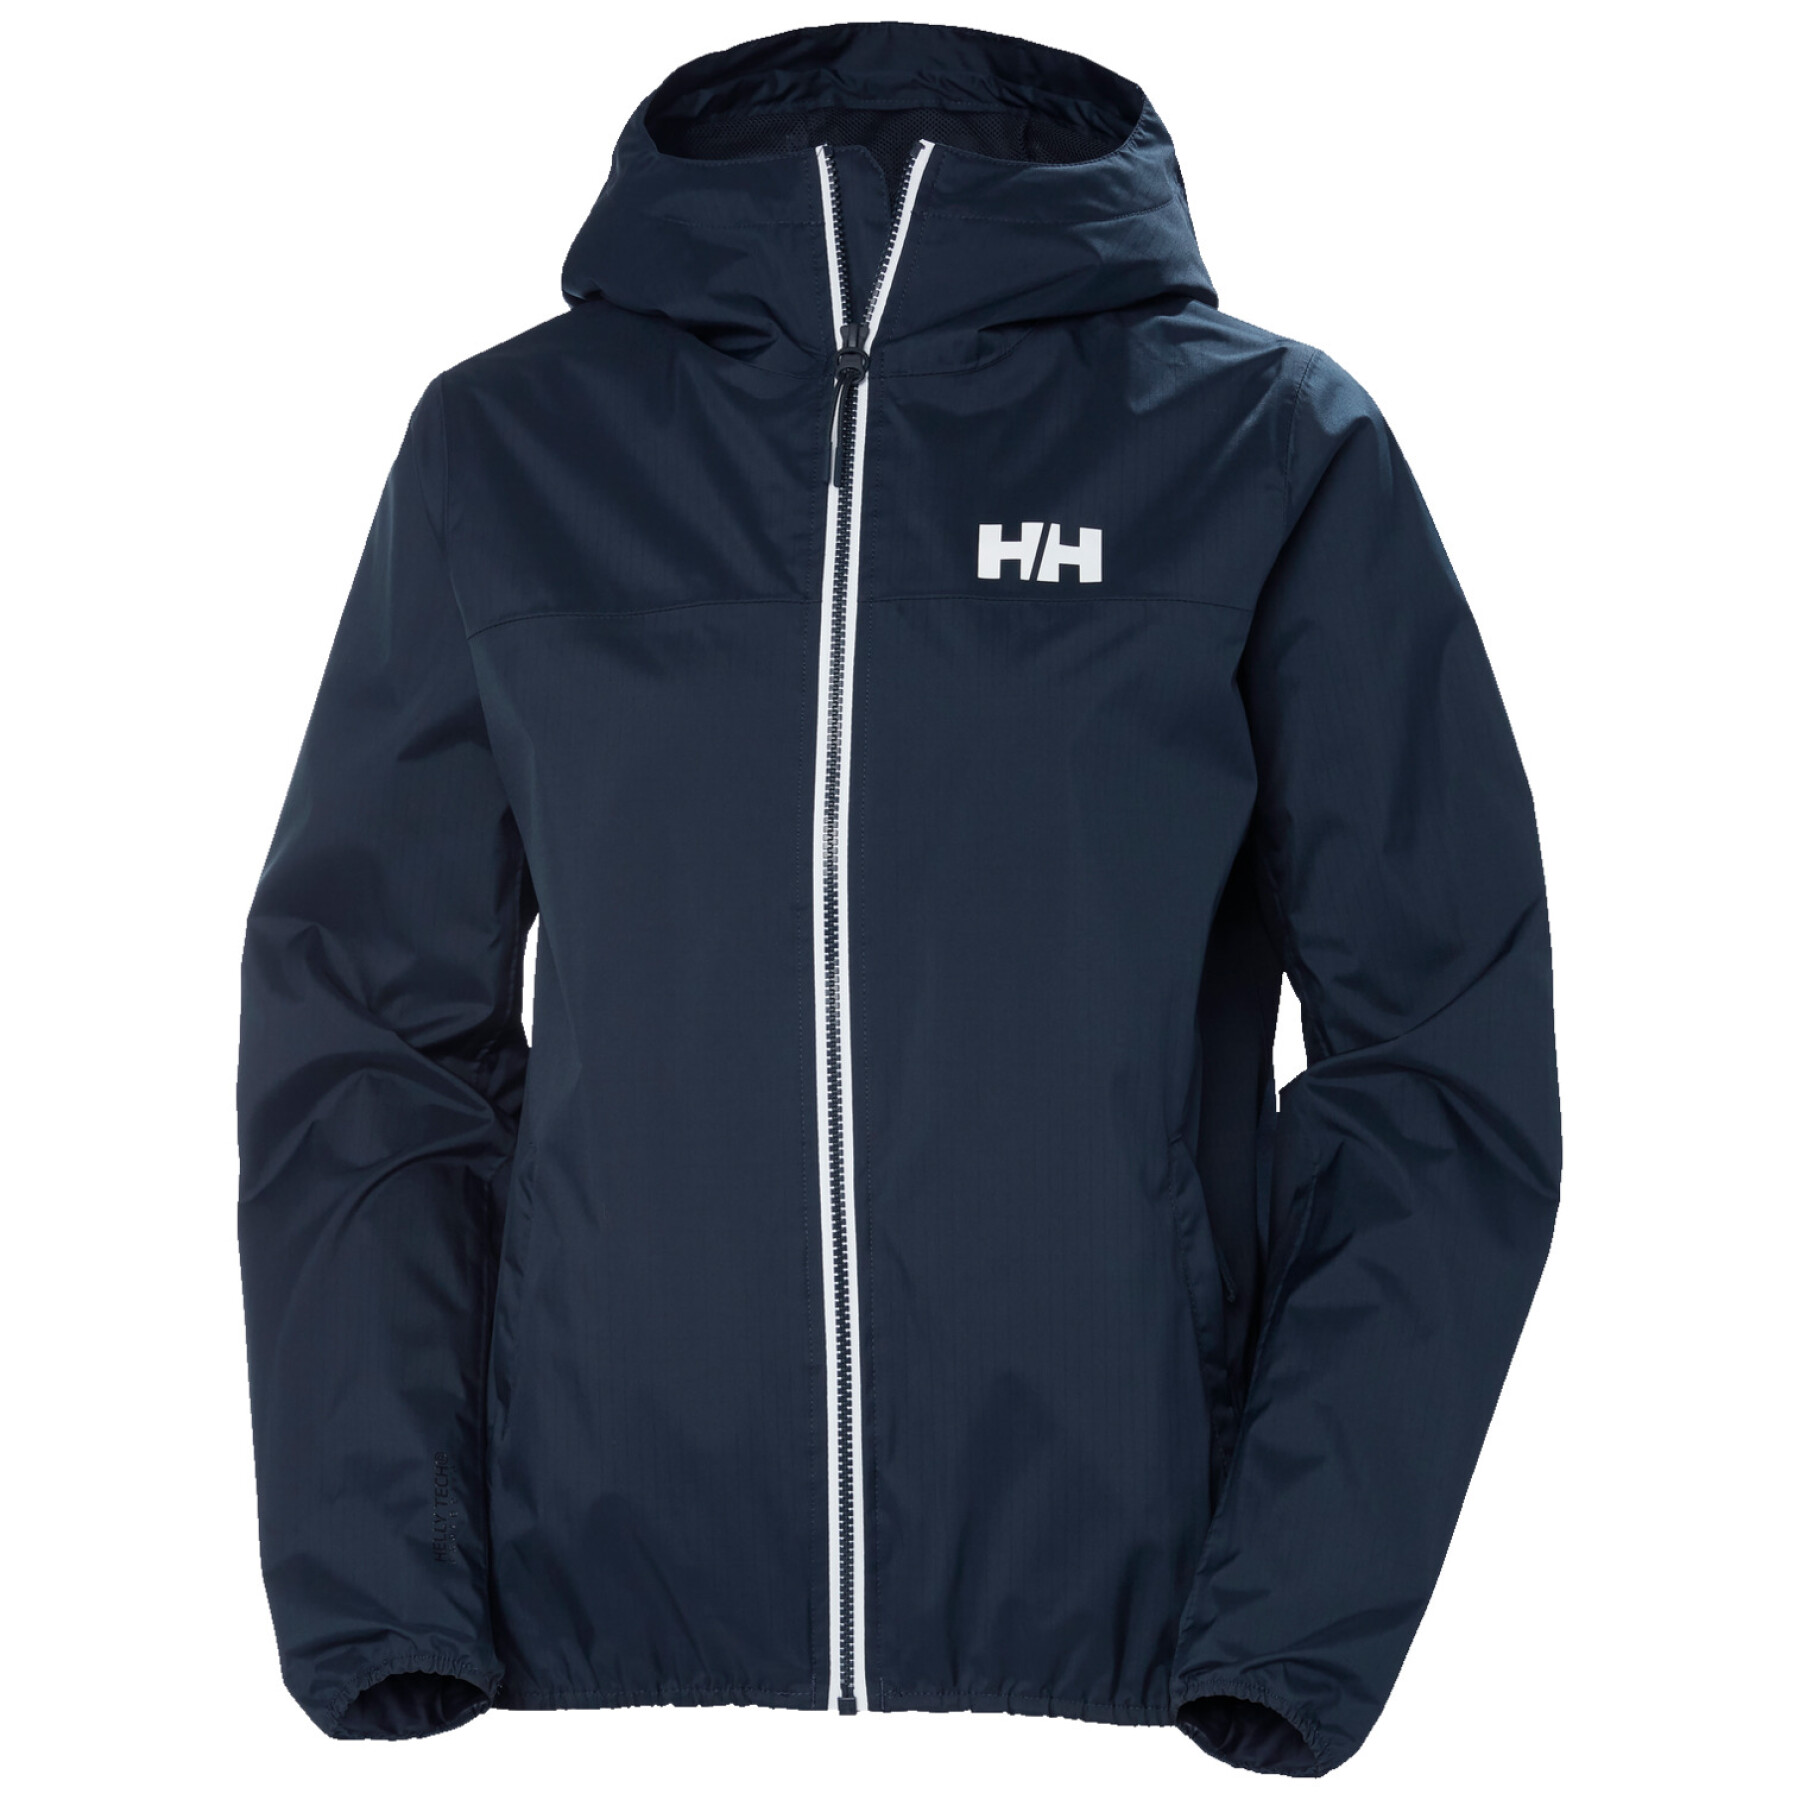 Chaqueta impermeable mujer Helly Hansen Belfast II Packable